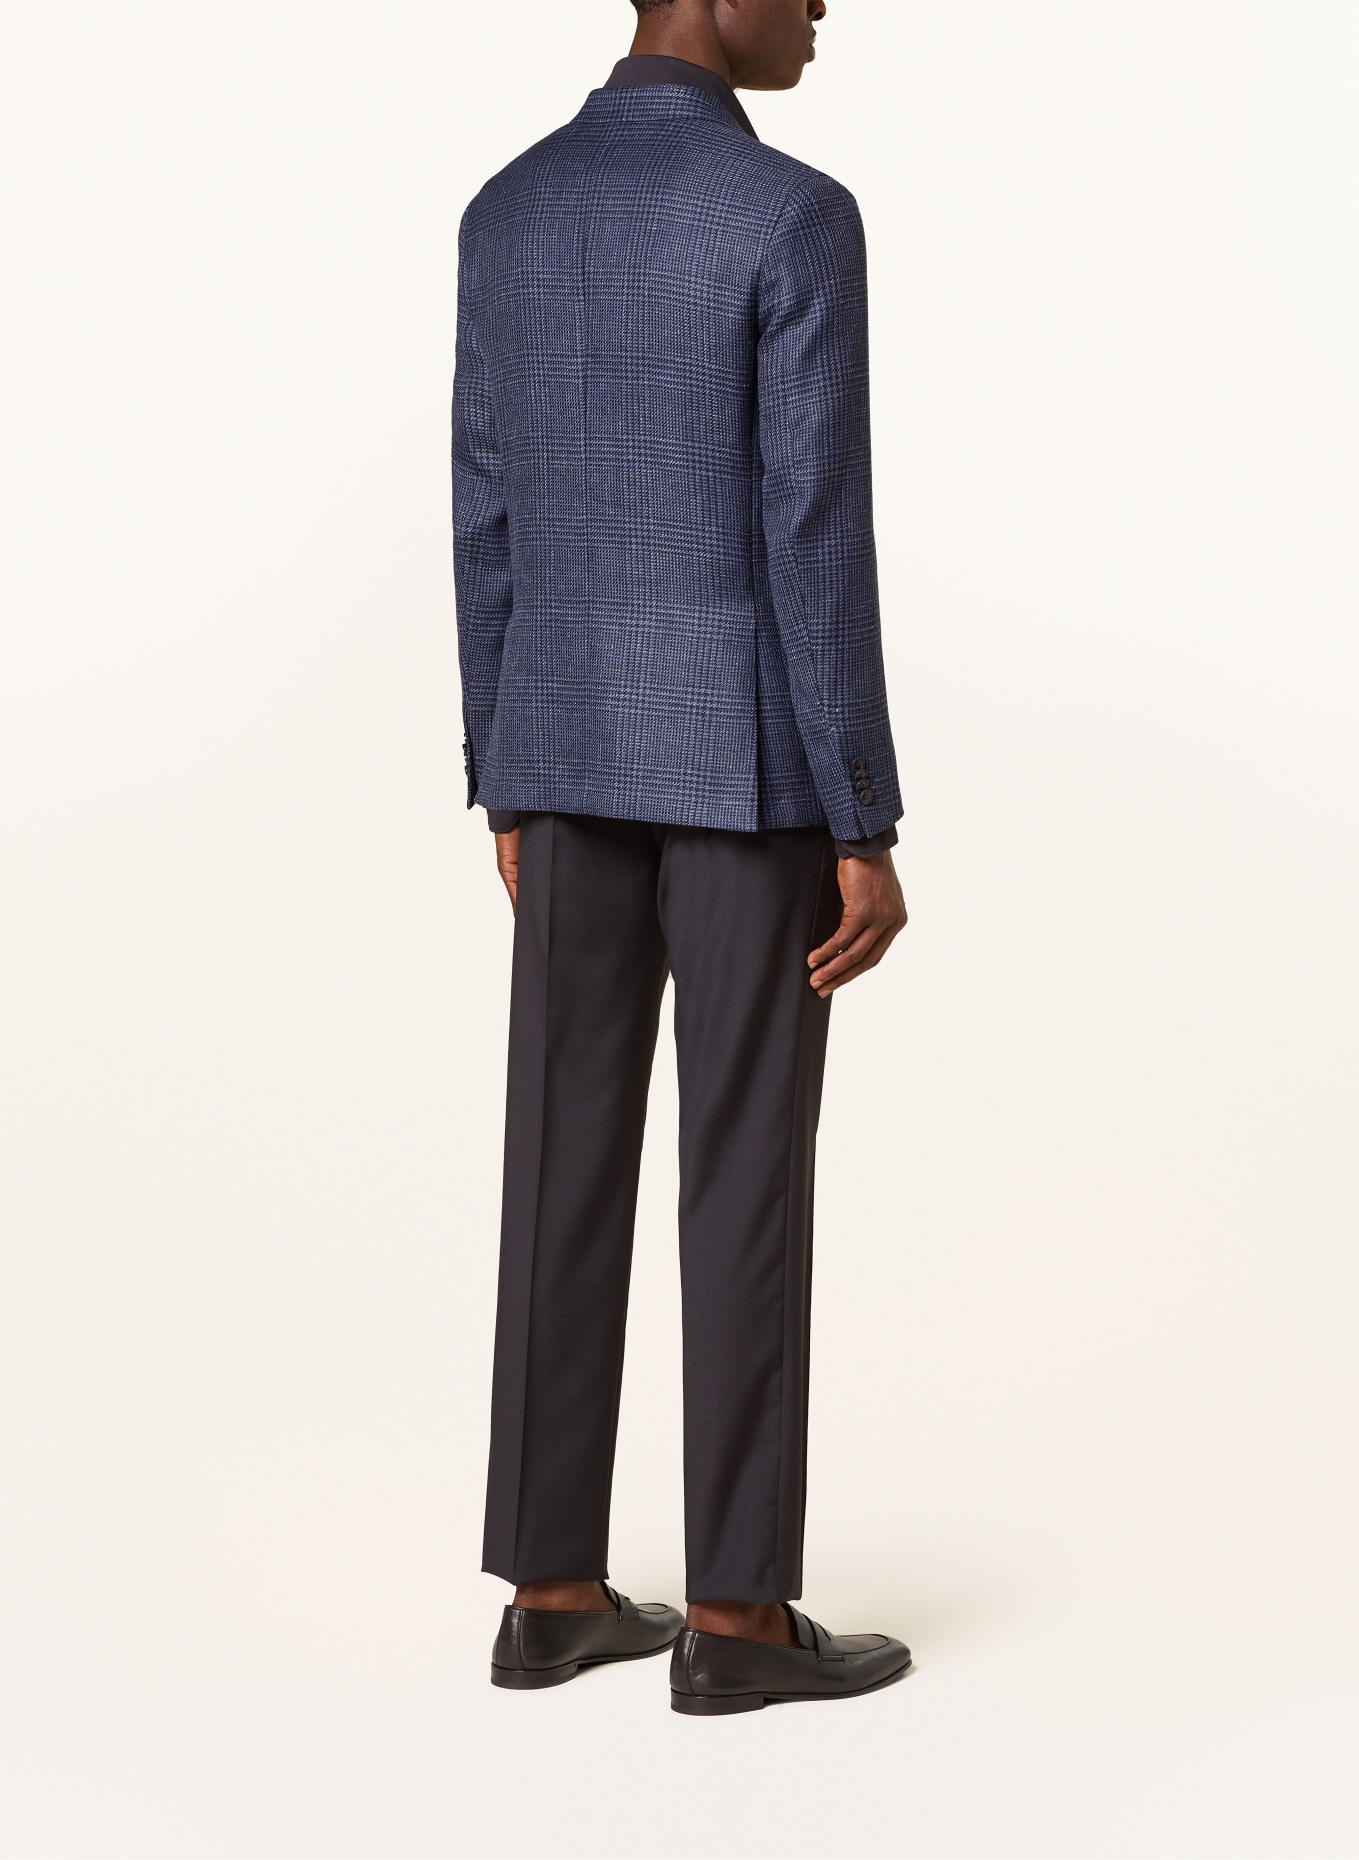 ZEGNA Tailored jacket extra slim fit with linen, Color: BLUE/ DARK BLUE (Image 3)